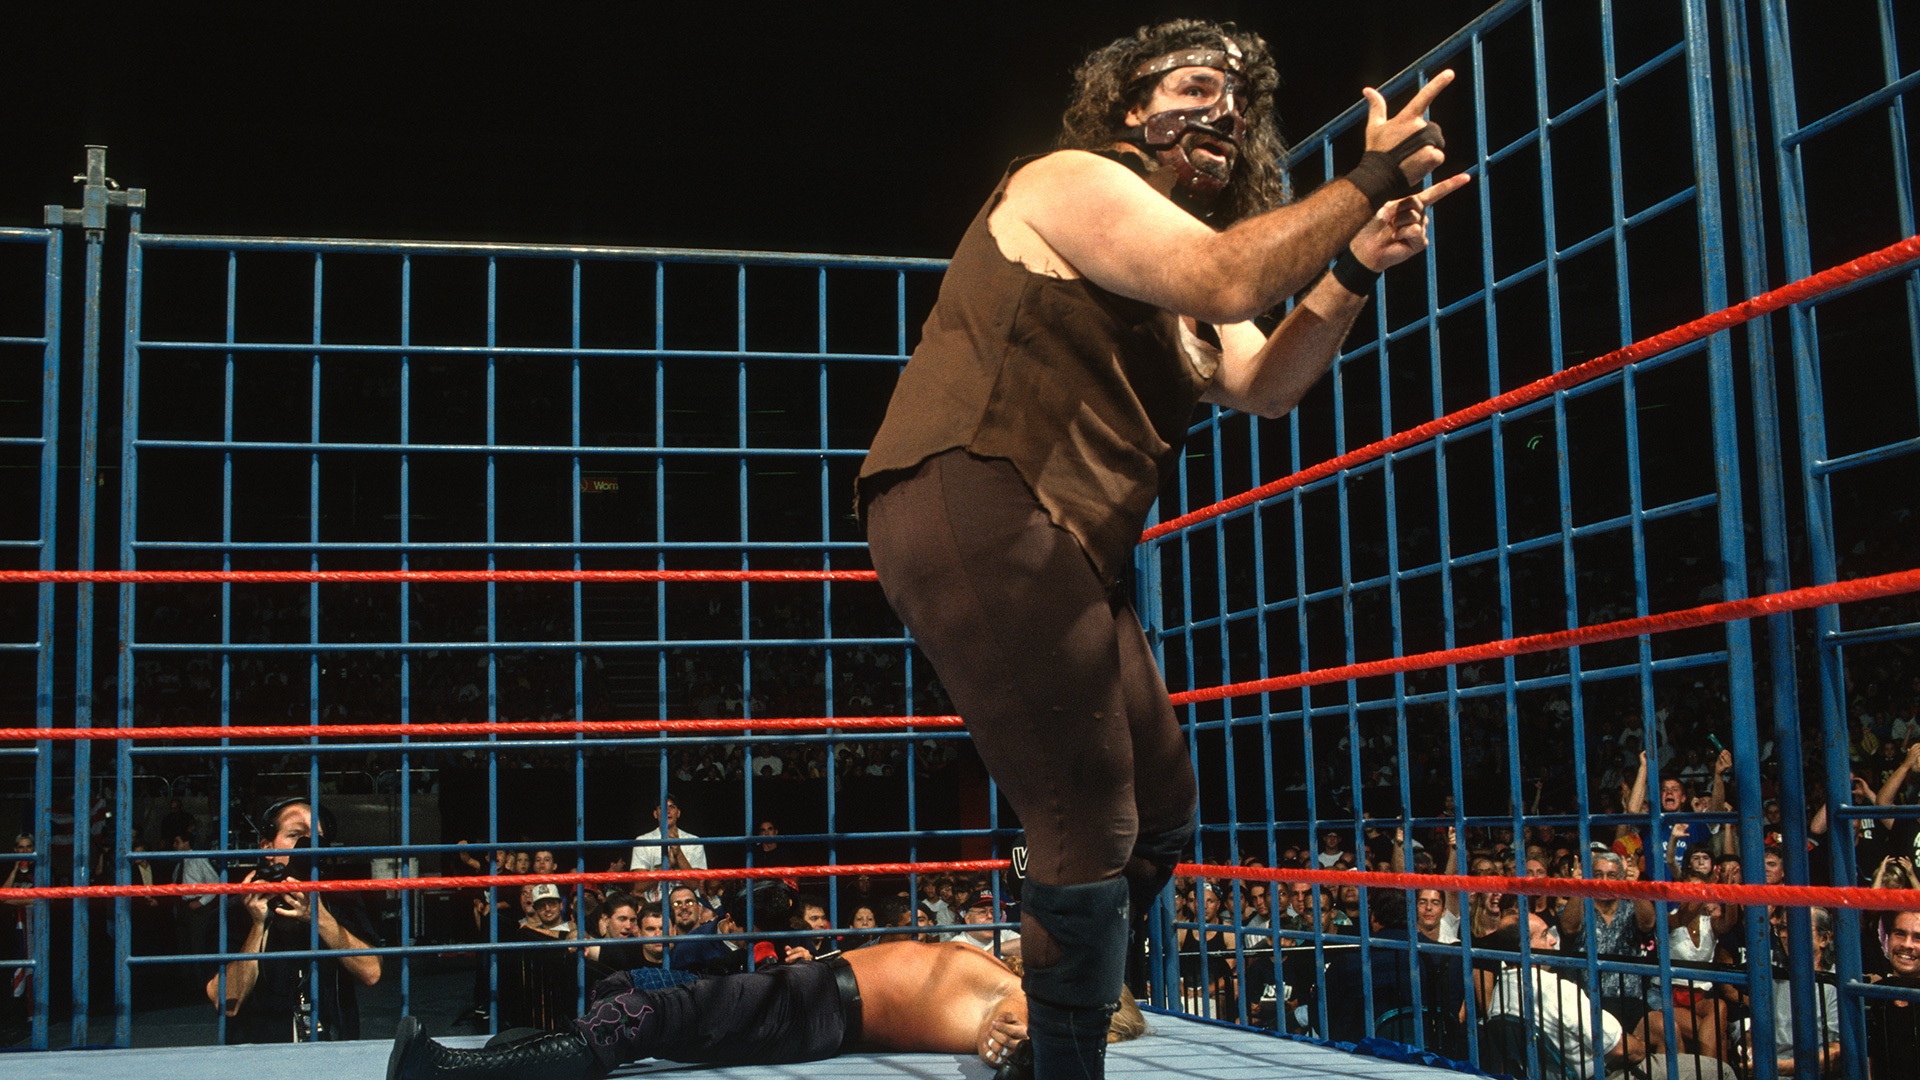 Mick Foley, performing as Mankind, at Summerslam